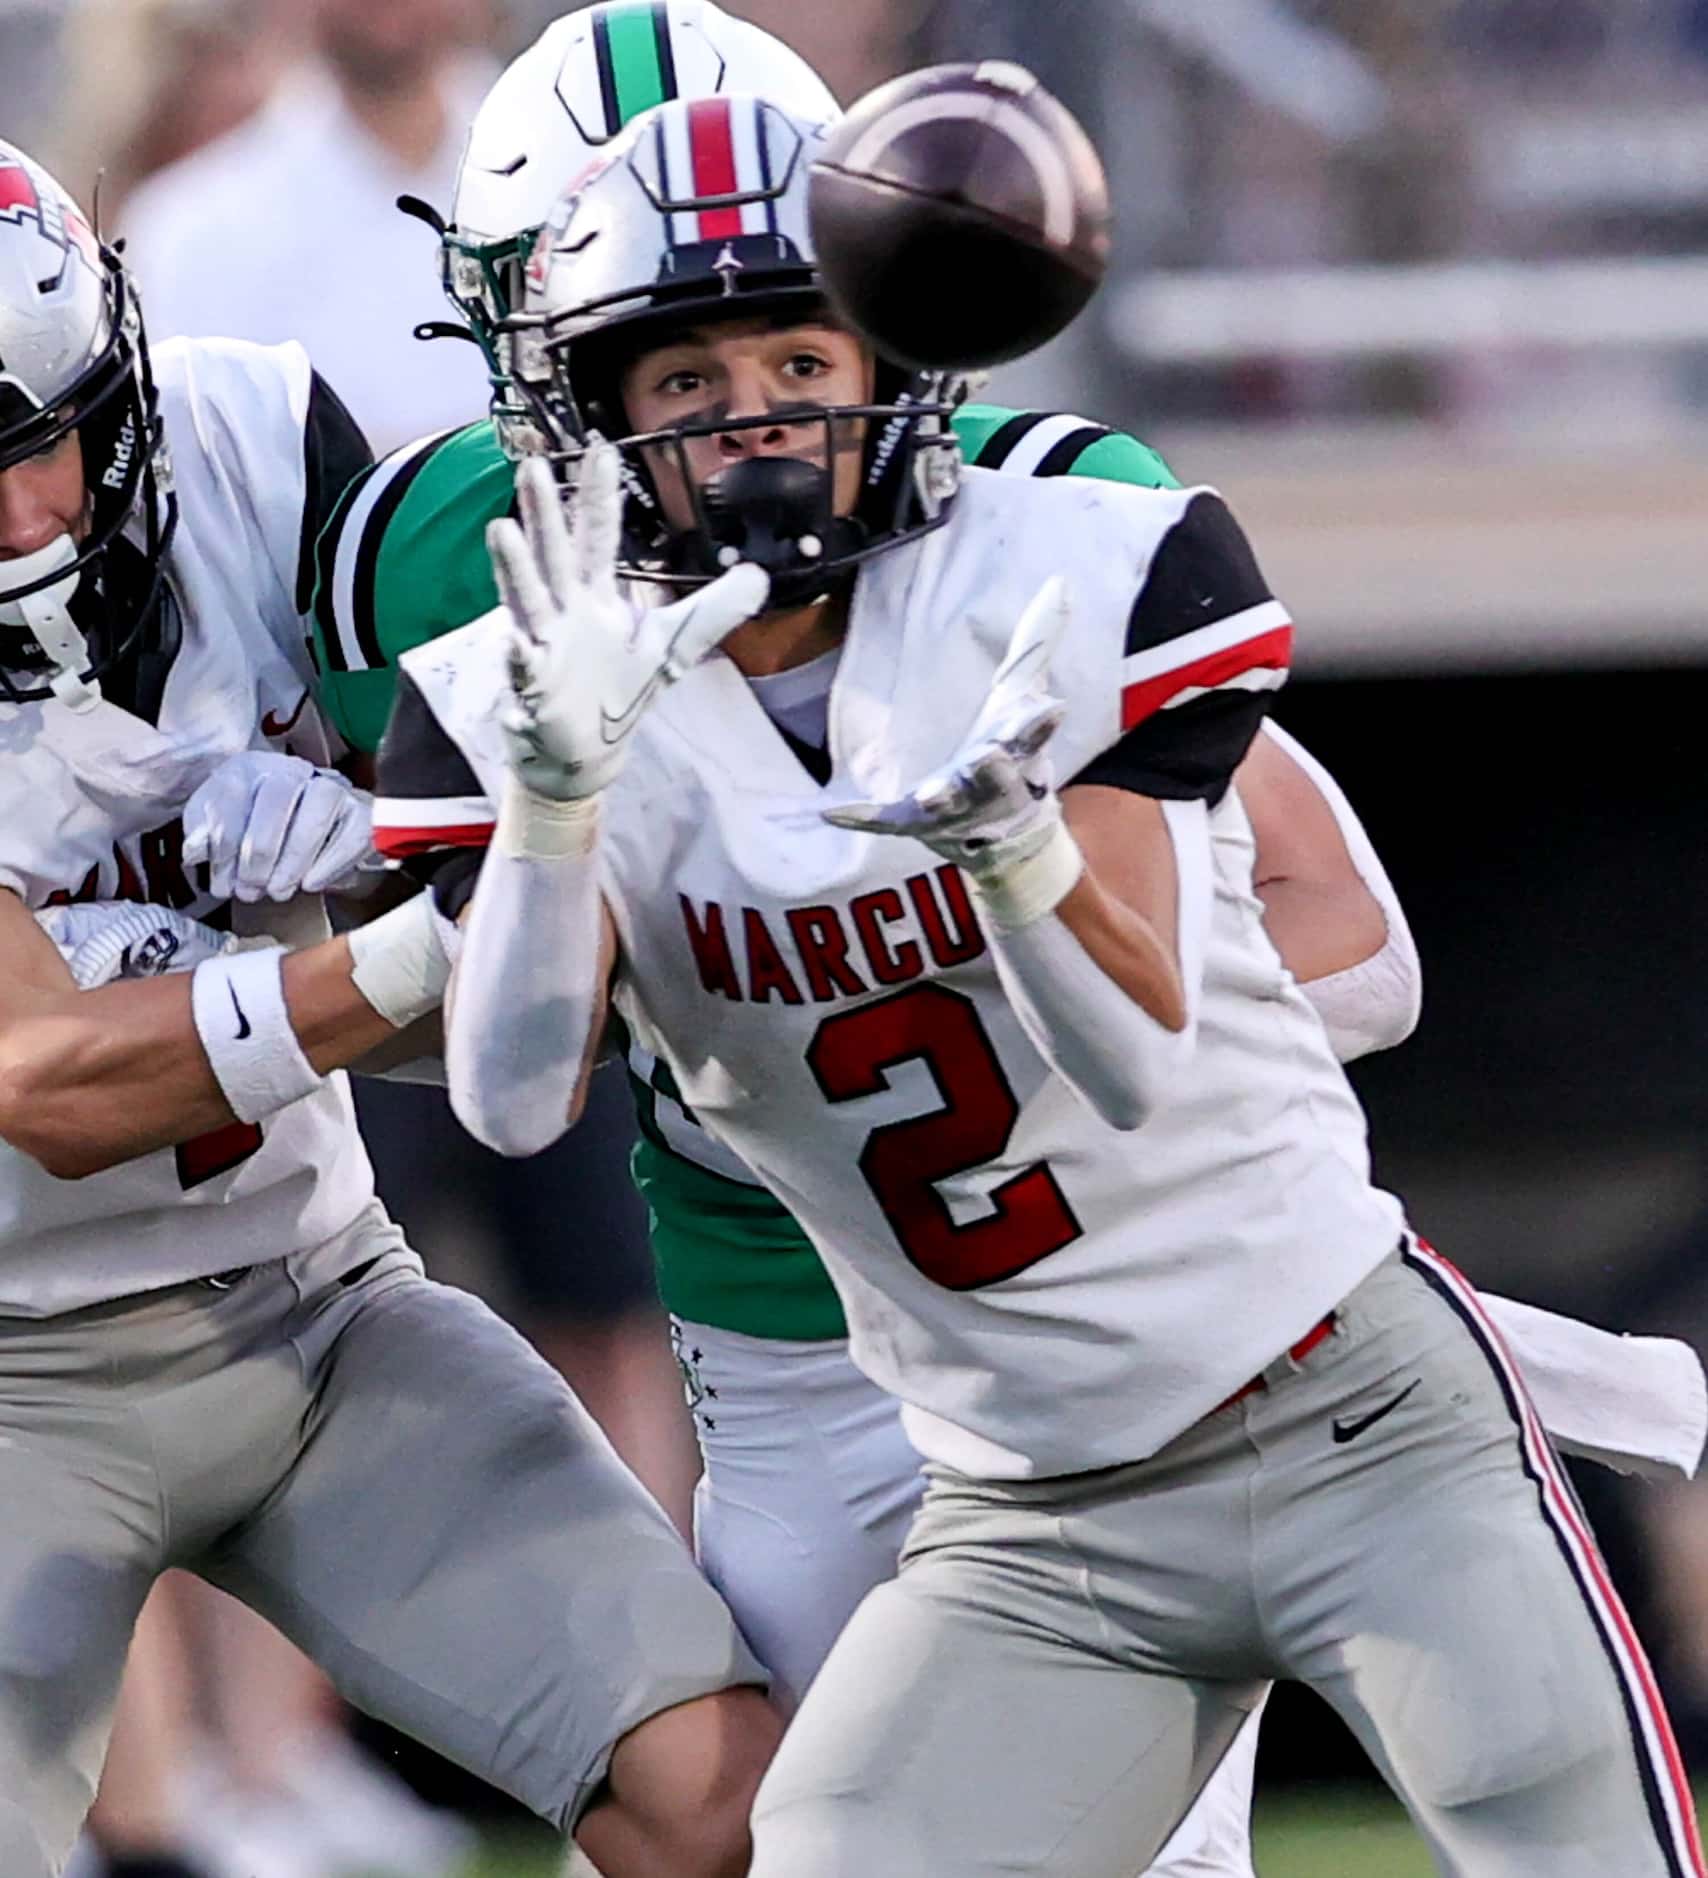 Flower Mound Marcus wide receiver Karic Grennan comes up with a reception and goes the...